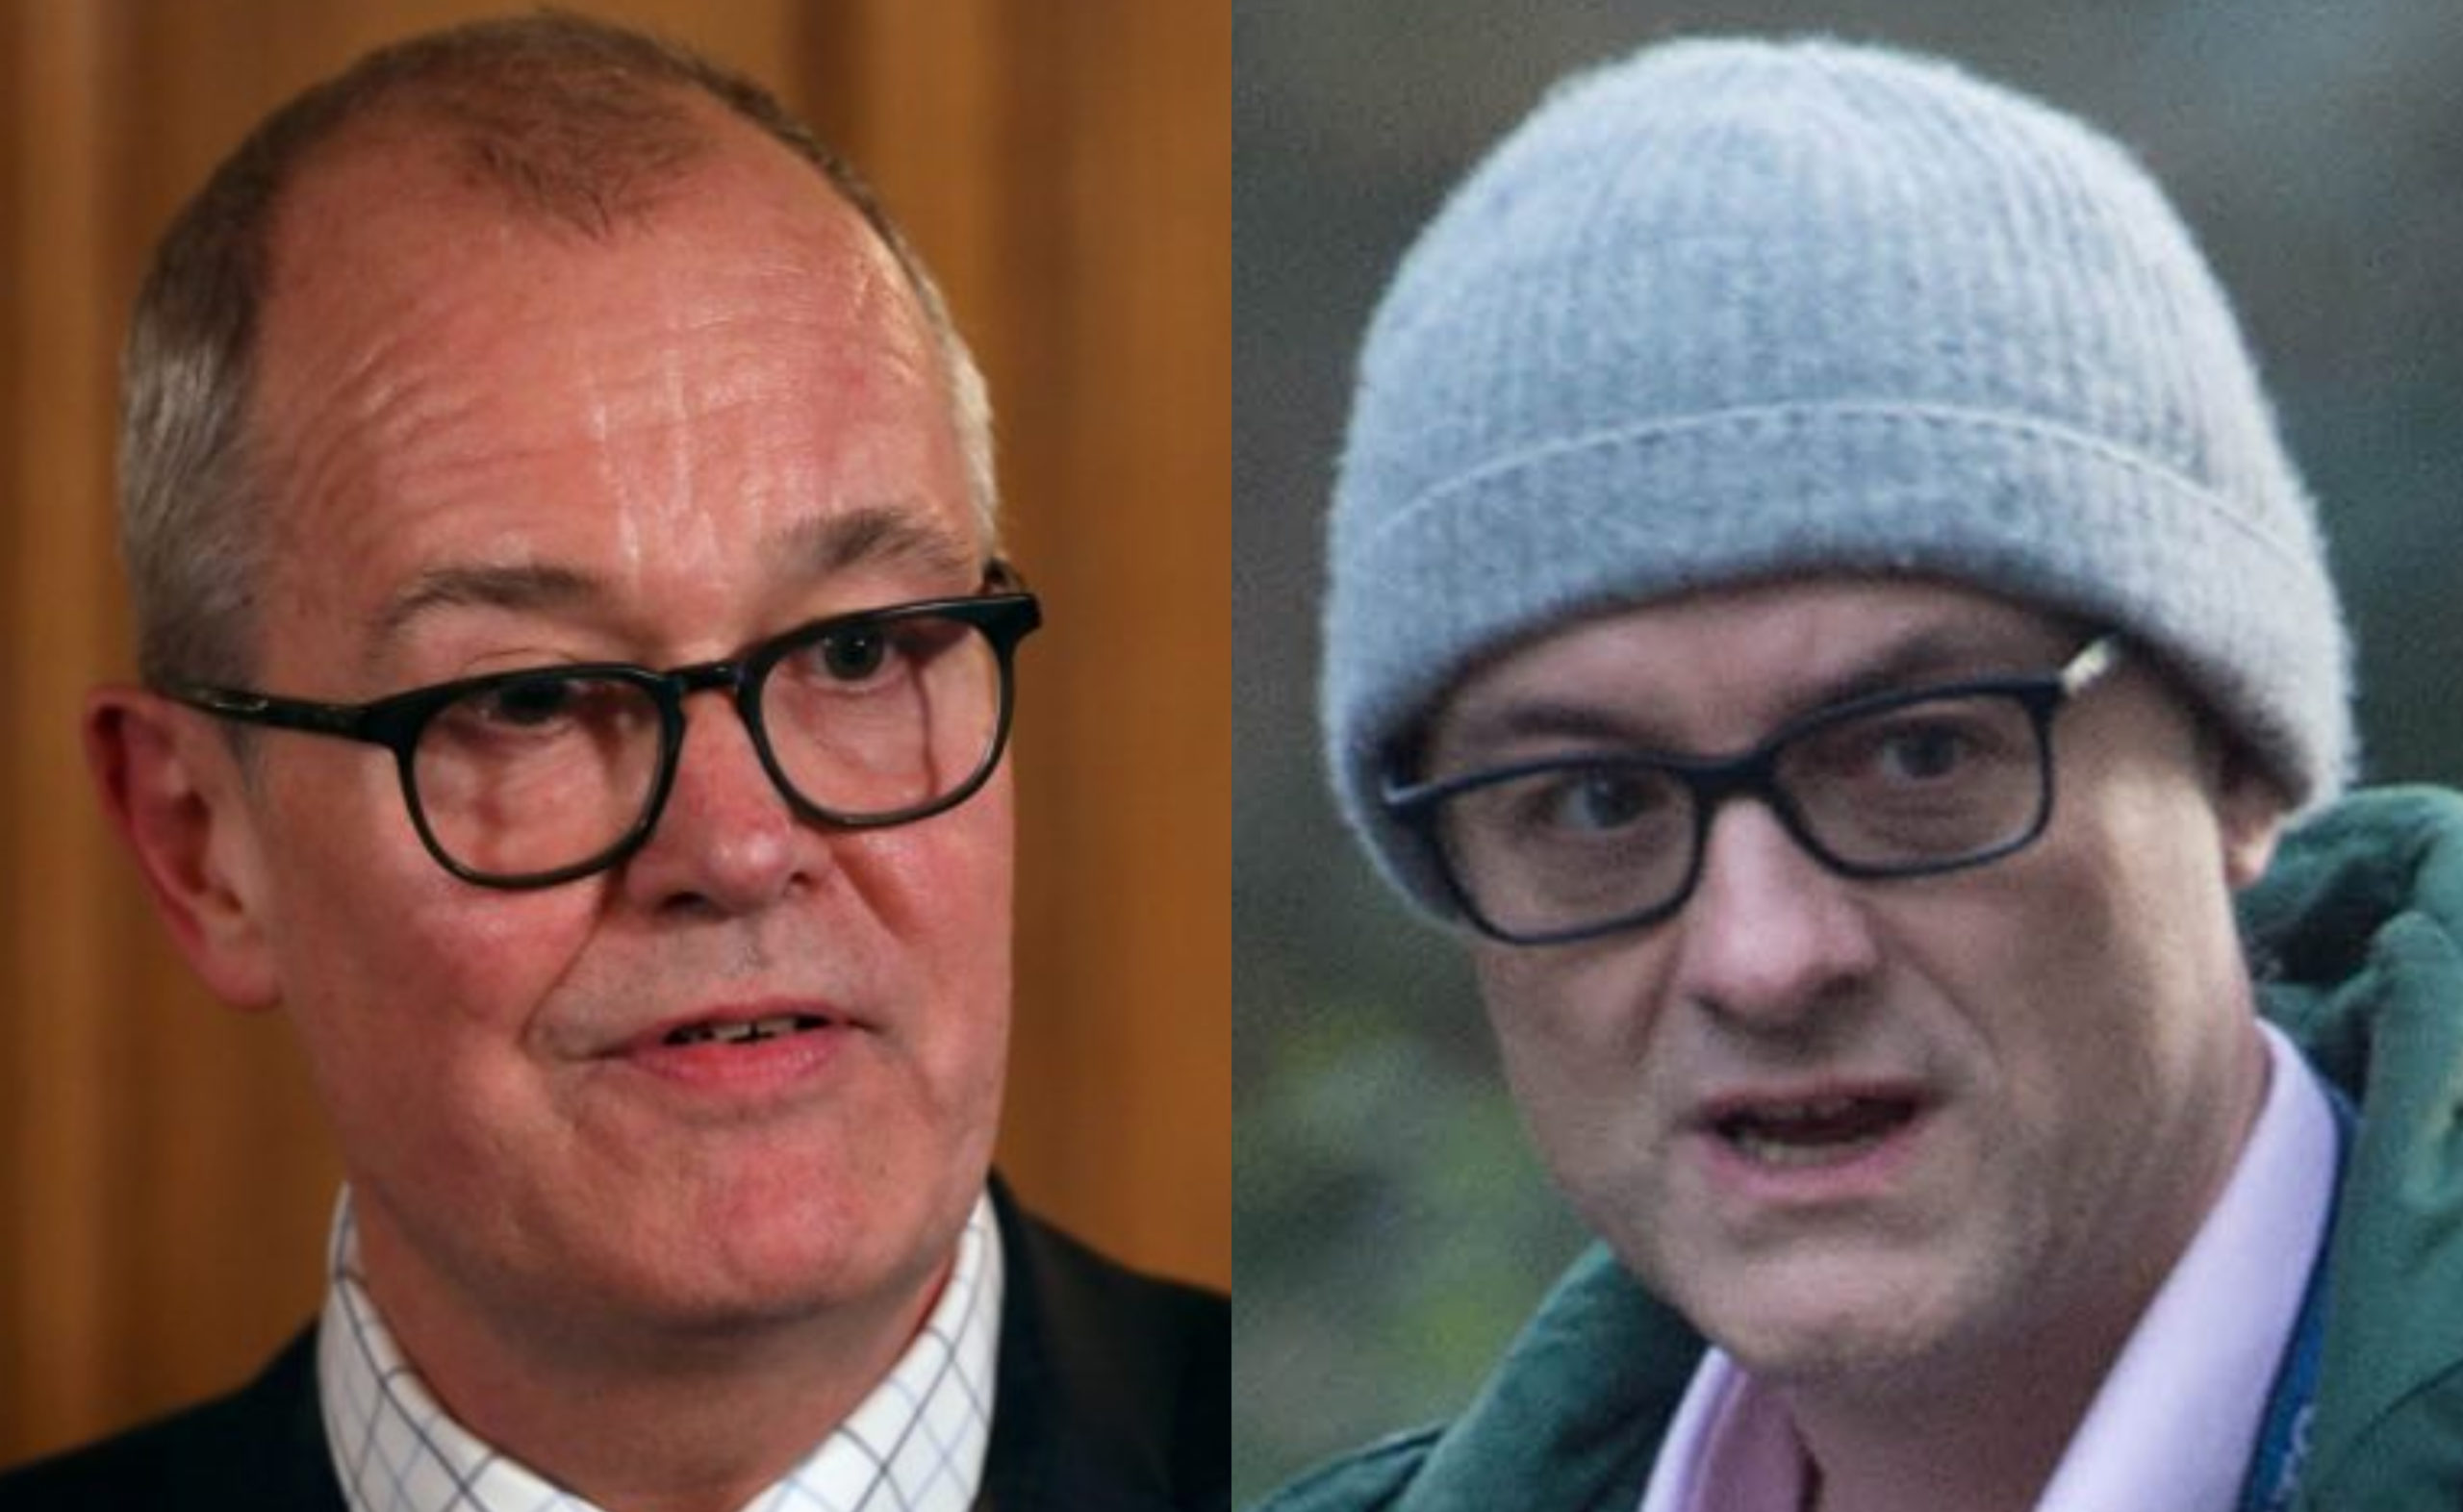 Sir Patrick Vallance and Dominic Cummings were both said to have supported a herd immunity strategy before changing course.